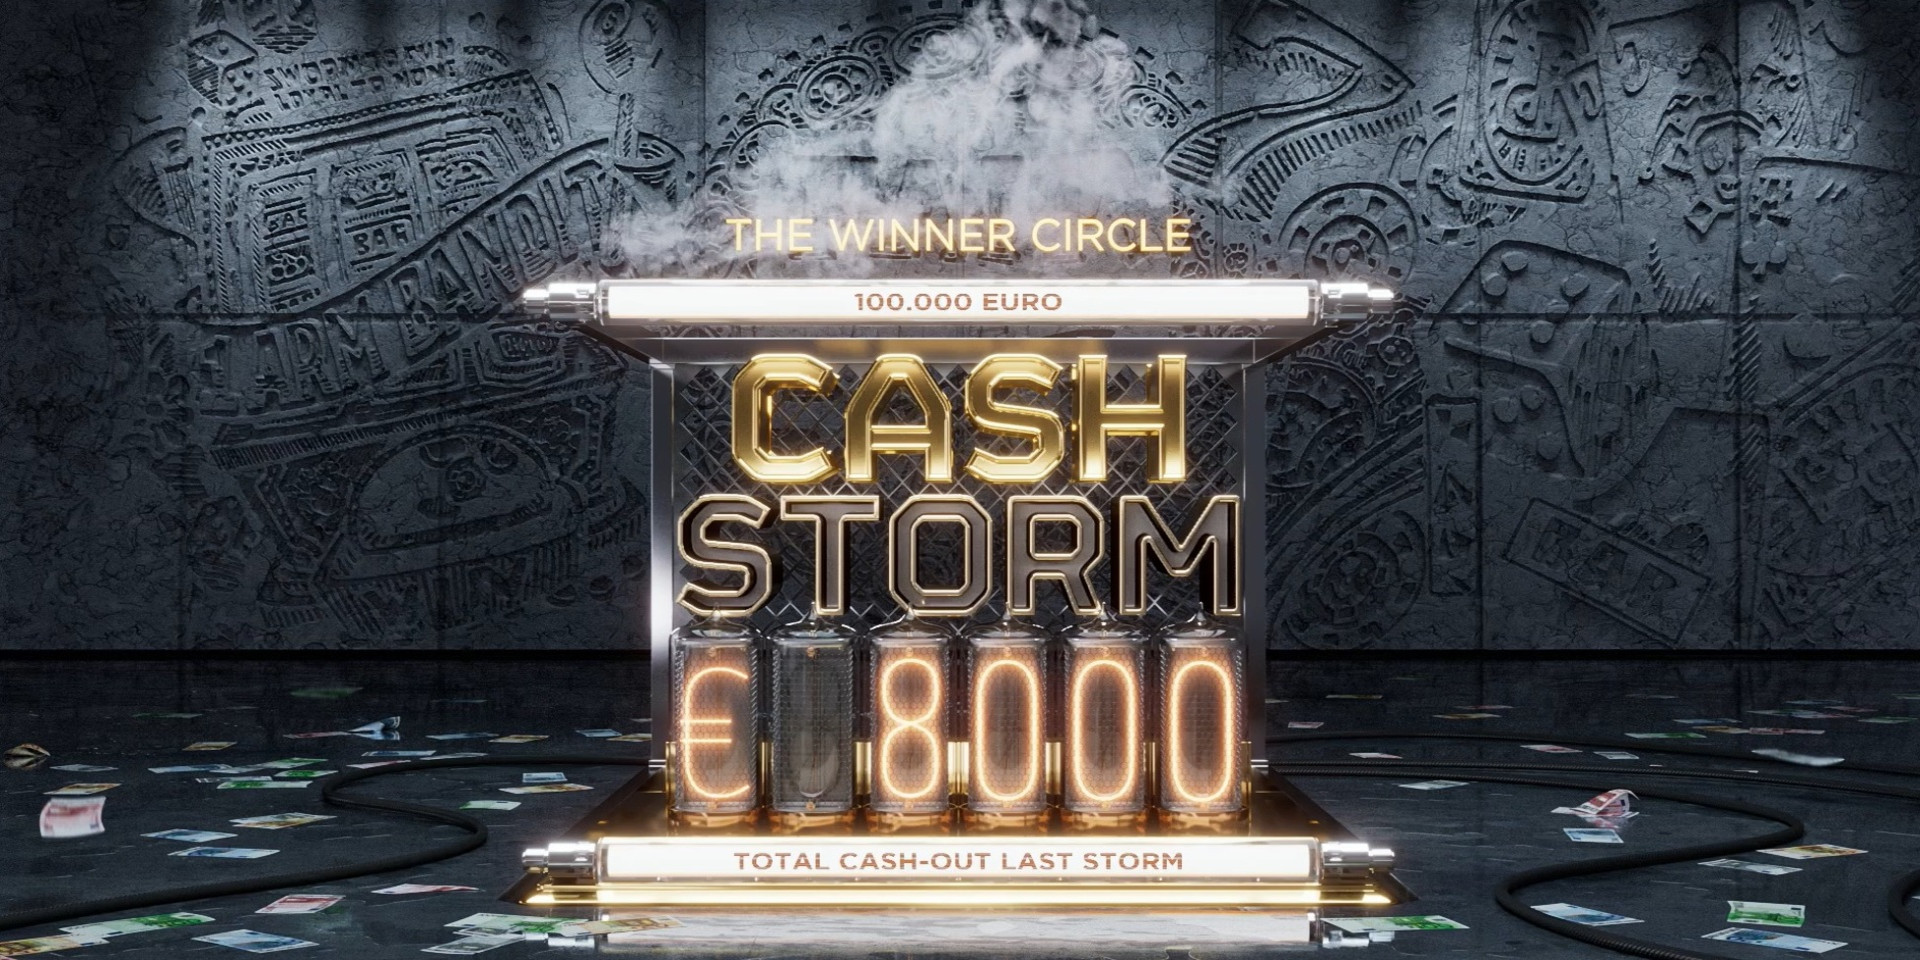 CONGRATS TO ALL CASH STORM WINNERS!